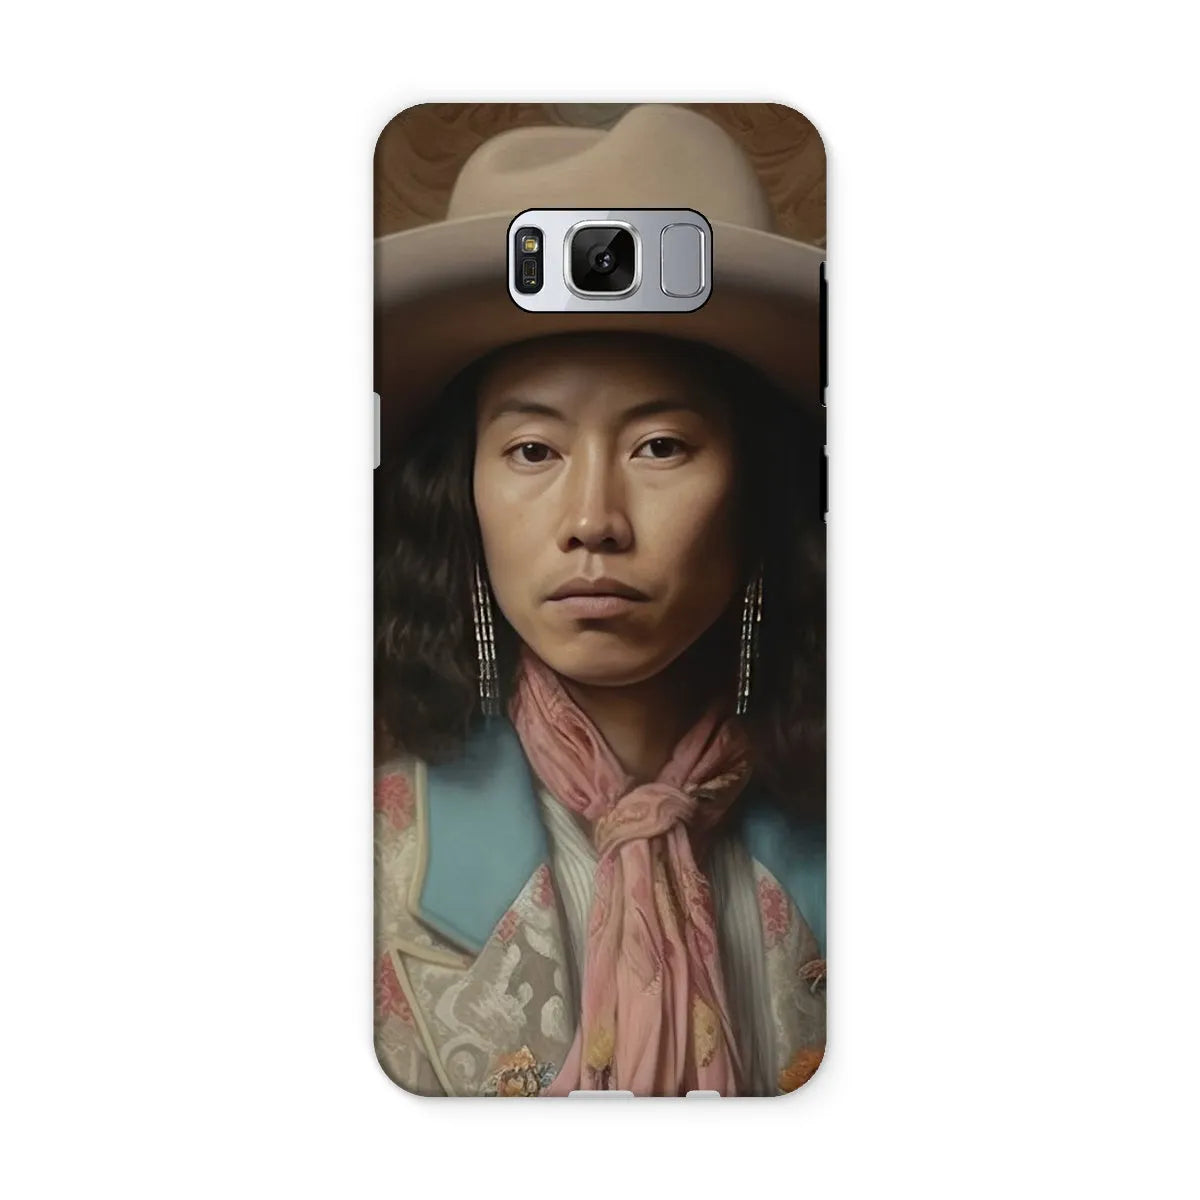 Dorjee The Gay Cowboy - Dandy Gay Aesthetic Art Phone Case - Samsung Galaxy S8 / Matte - Mobile Phone Cases - Aesthetic